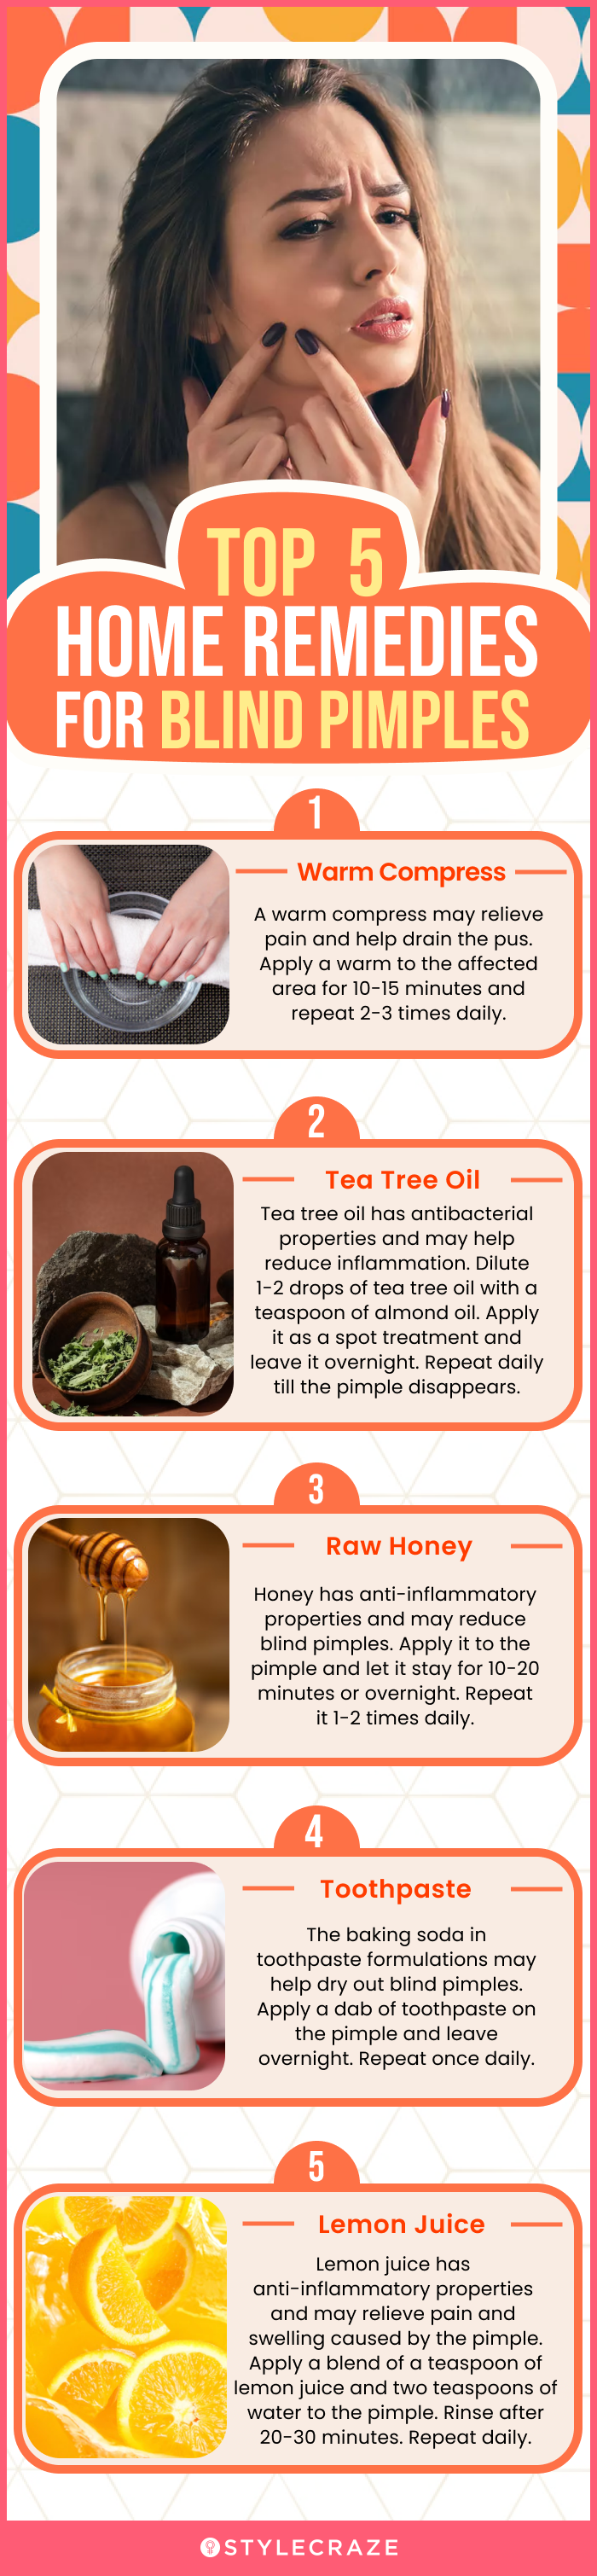 top 5 home remedies for blind pimples (infographic)